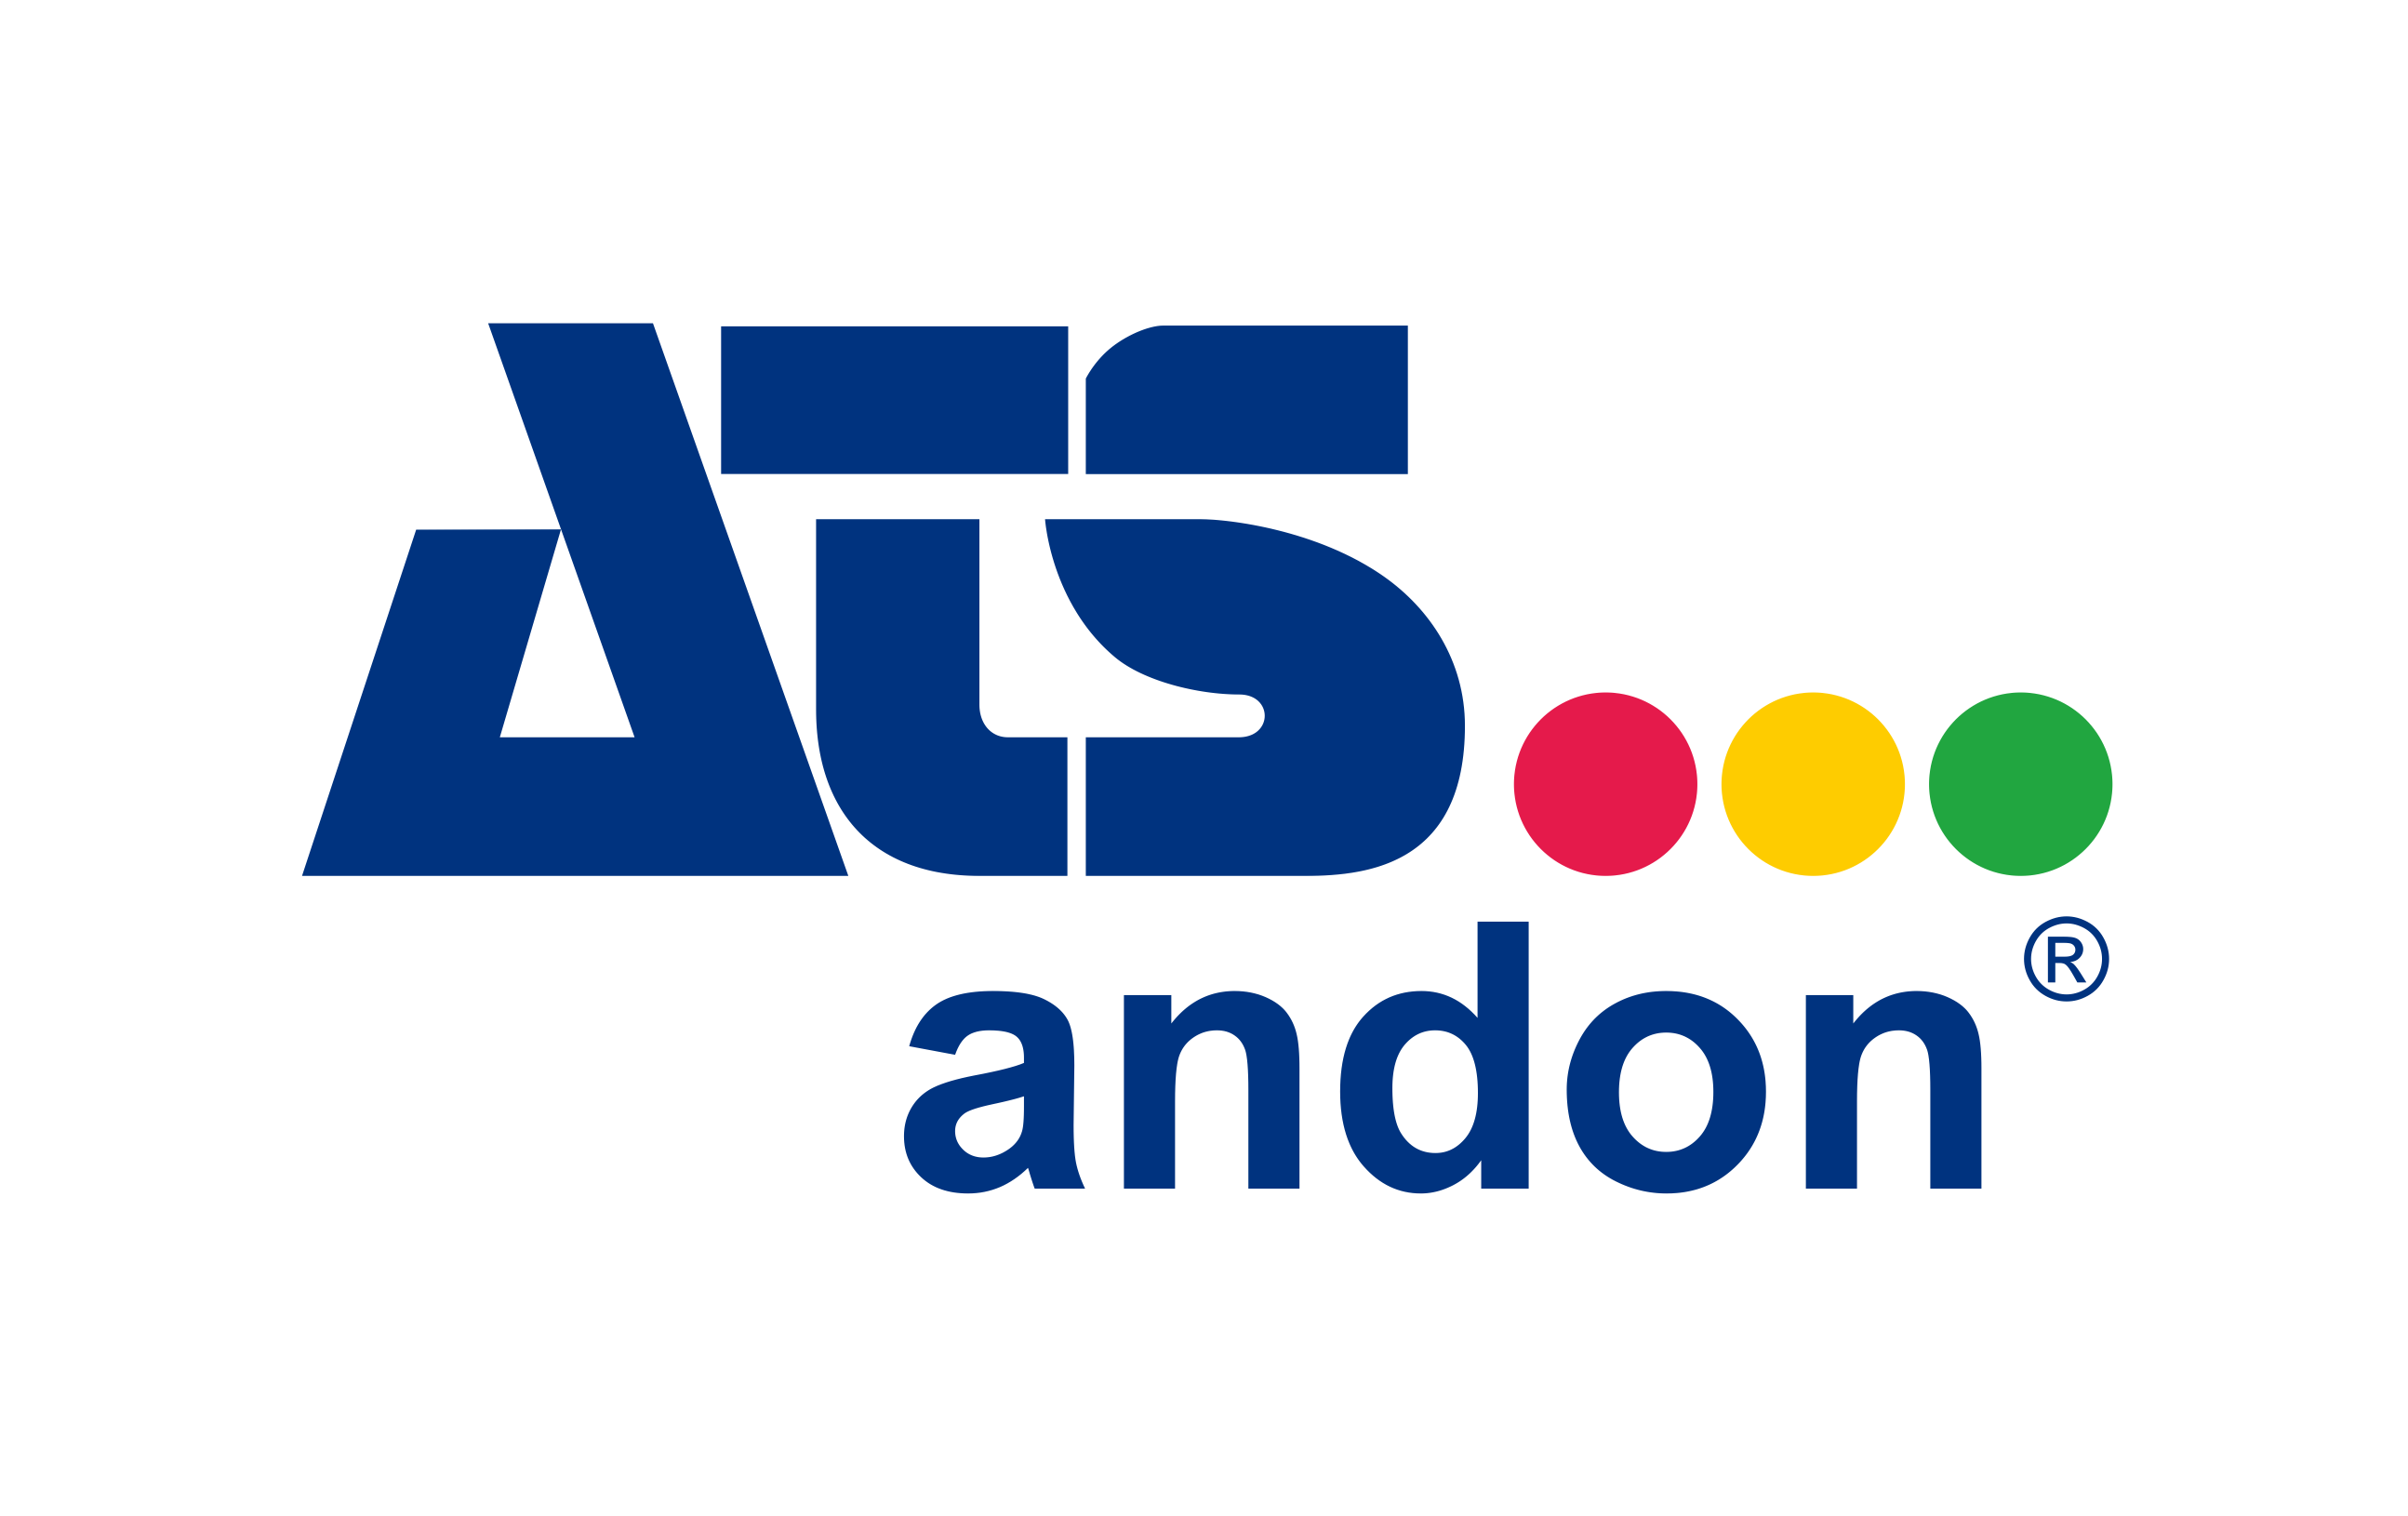 ATS Andon Archive